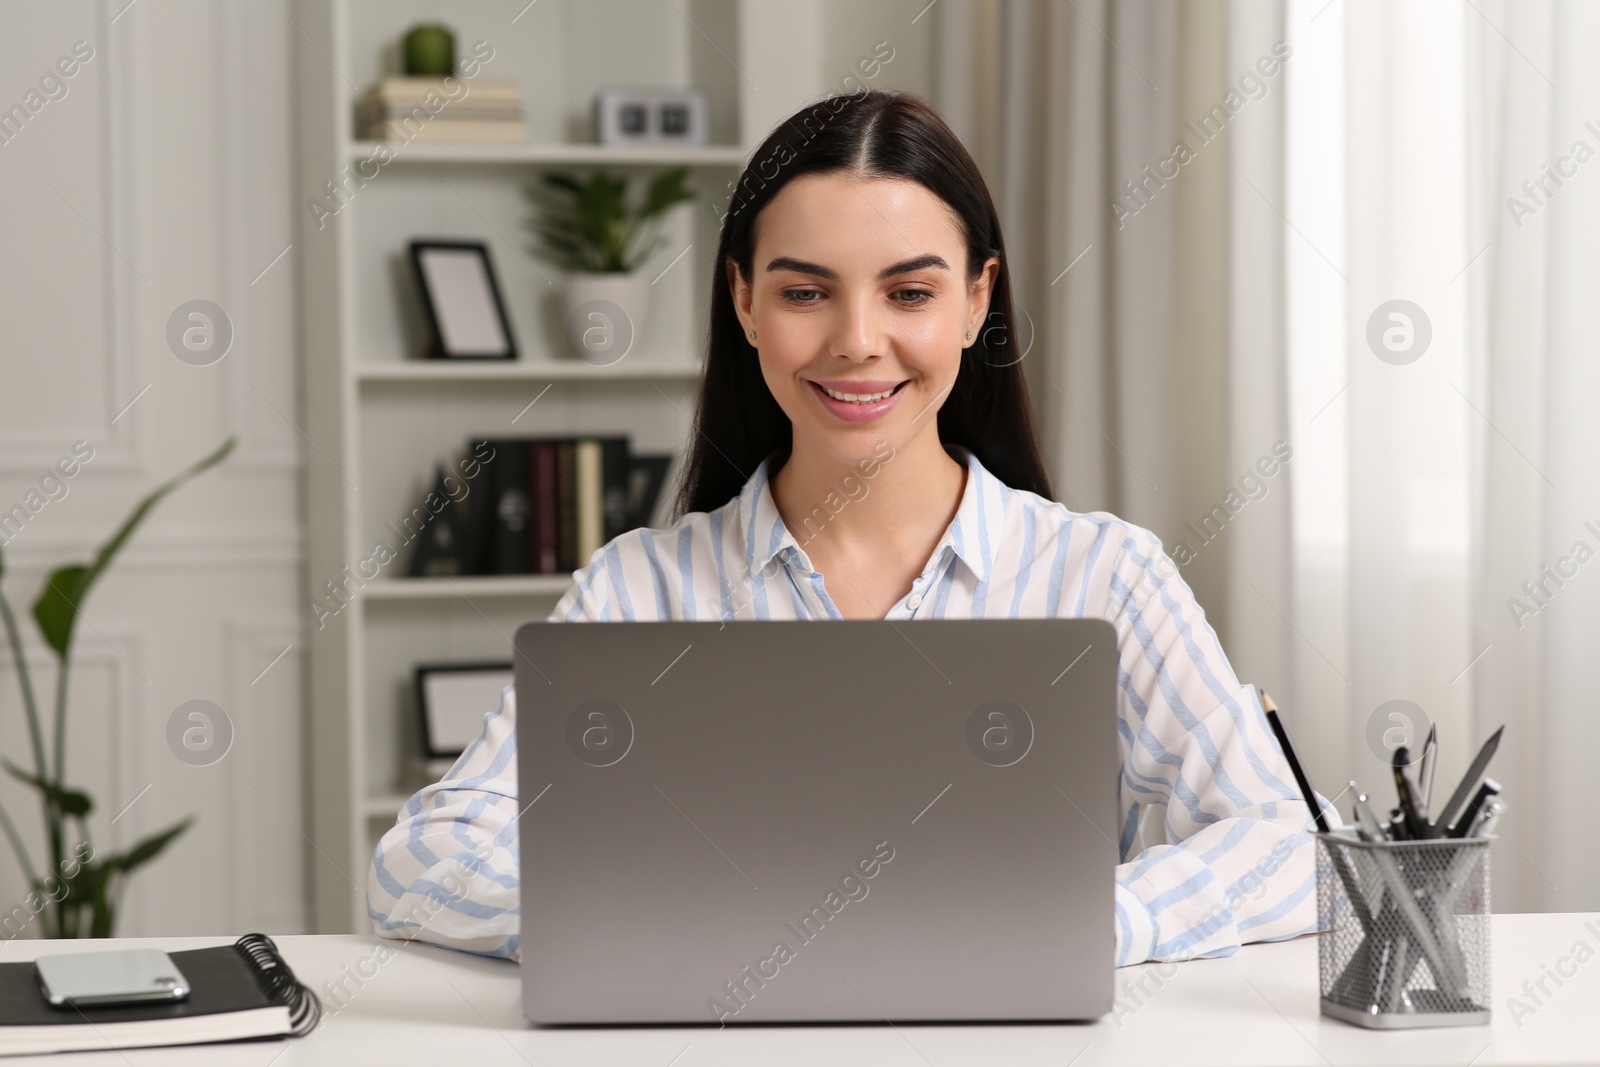 Photo of Happy woman working with laptop at white desk in room